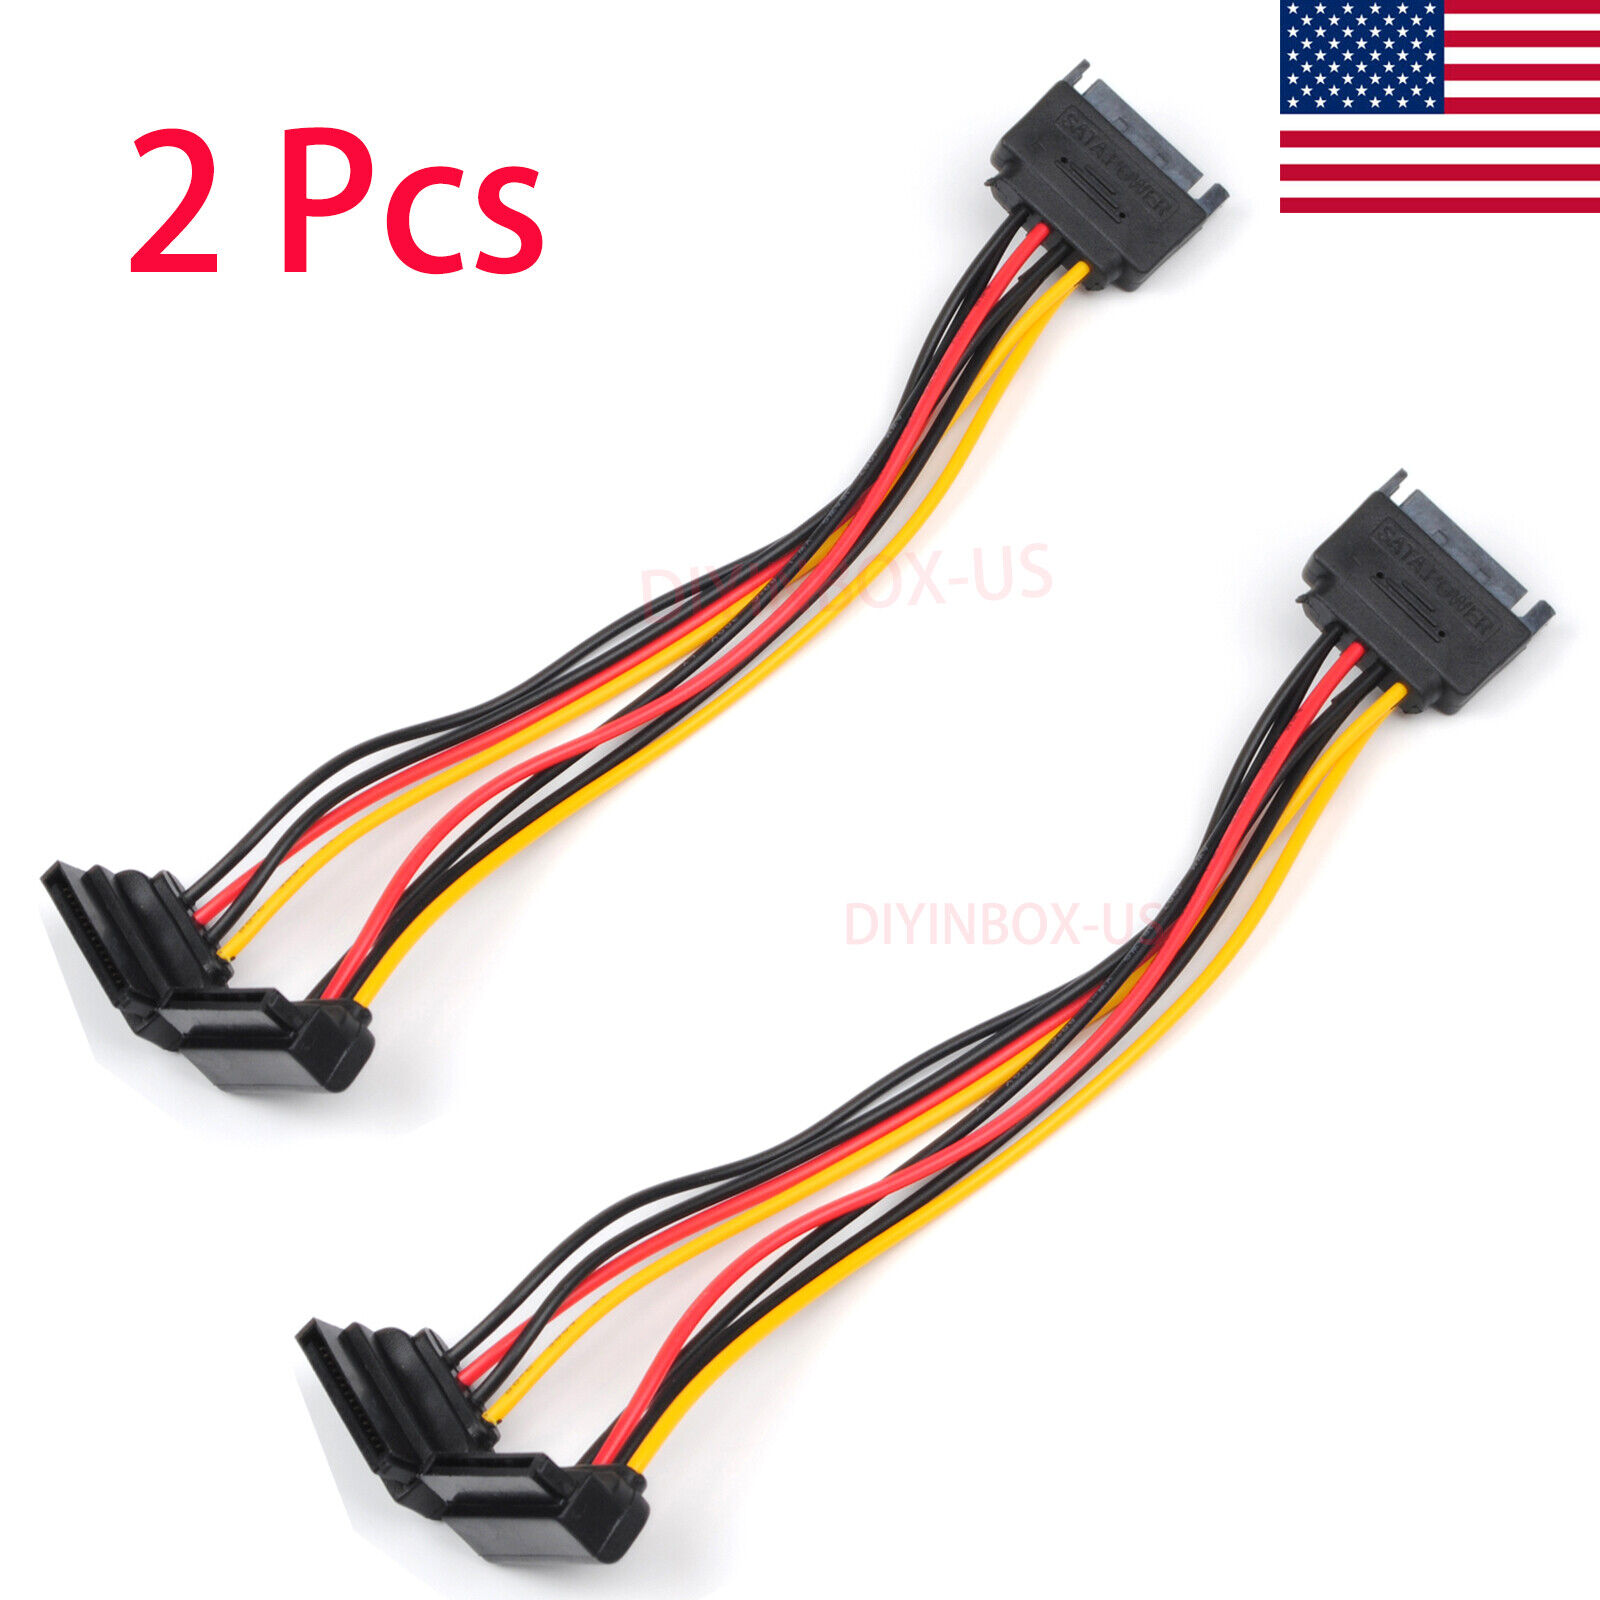 2pcs SATA Power15-pin Y-Splitter Cable Adapter Male to Female SSD HDD Hard Drive Unbranded